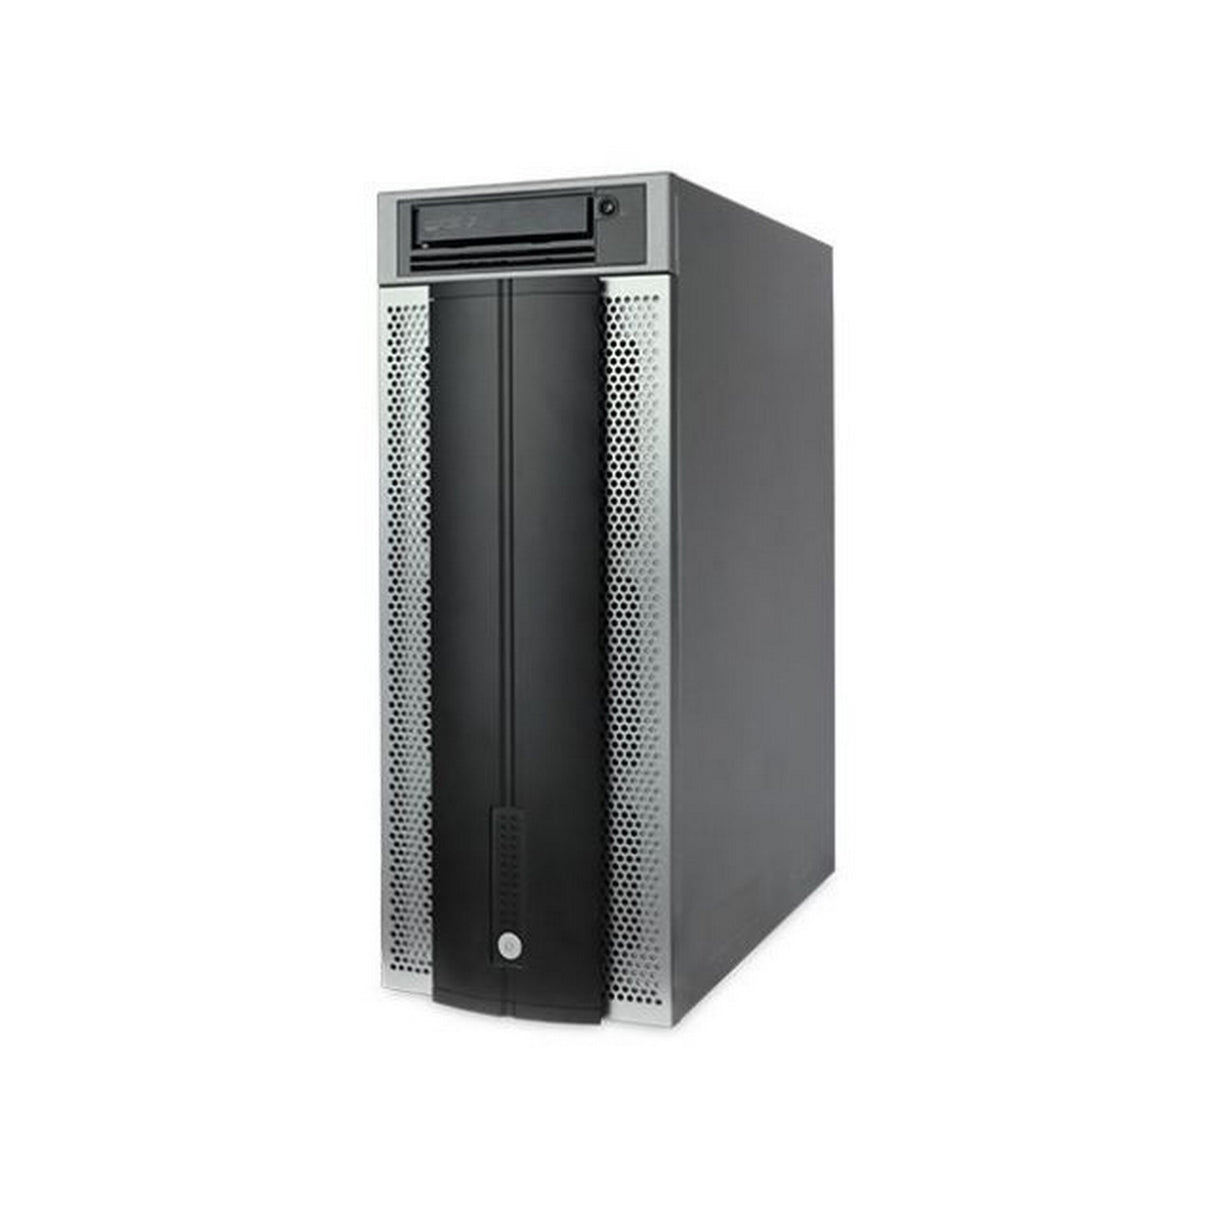 Accusys T-Share-LTO 11-Bay Tower RAID System with LTO Drive